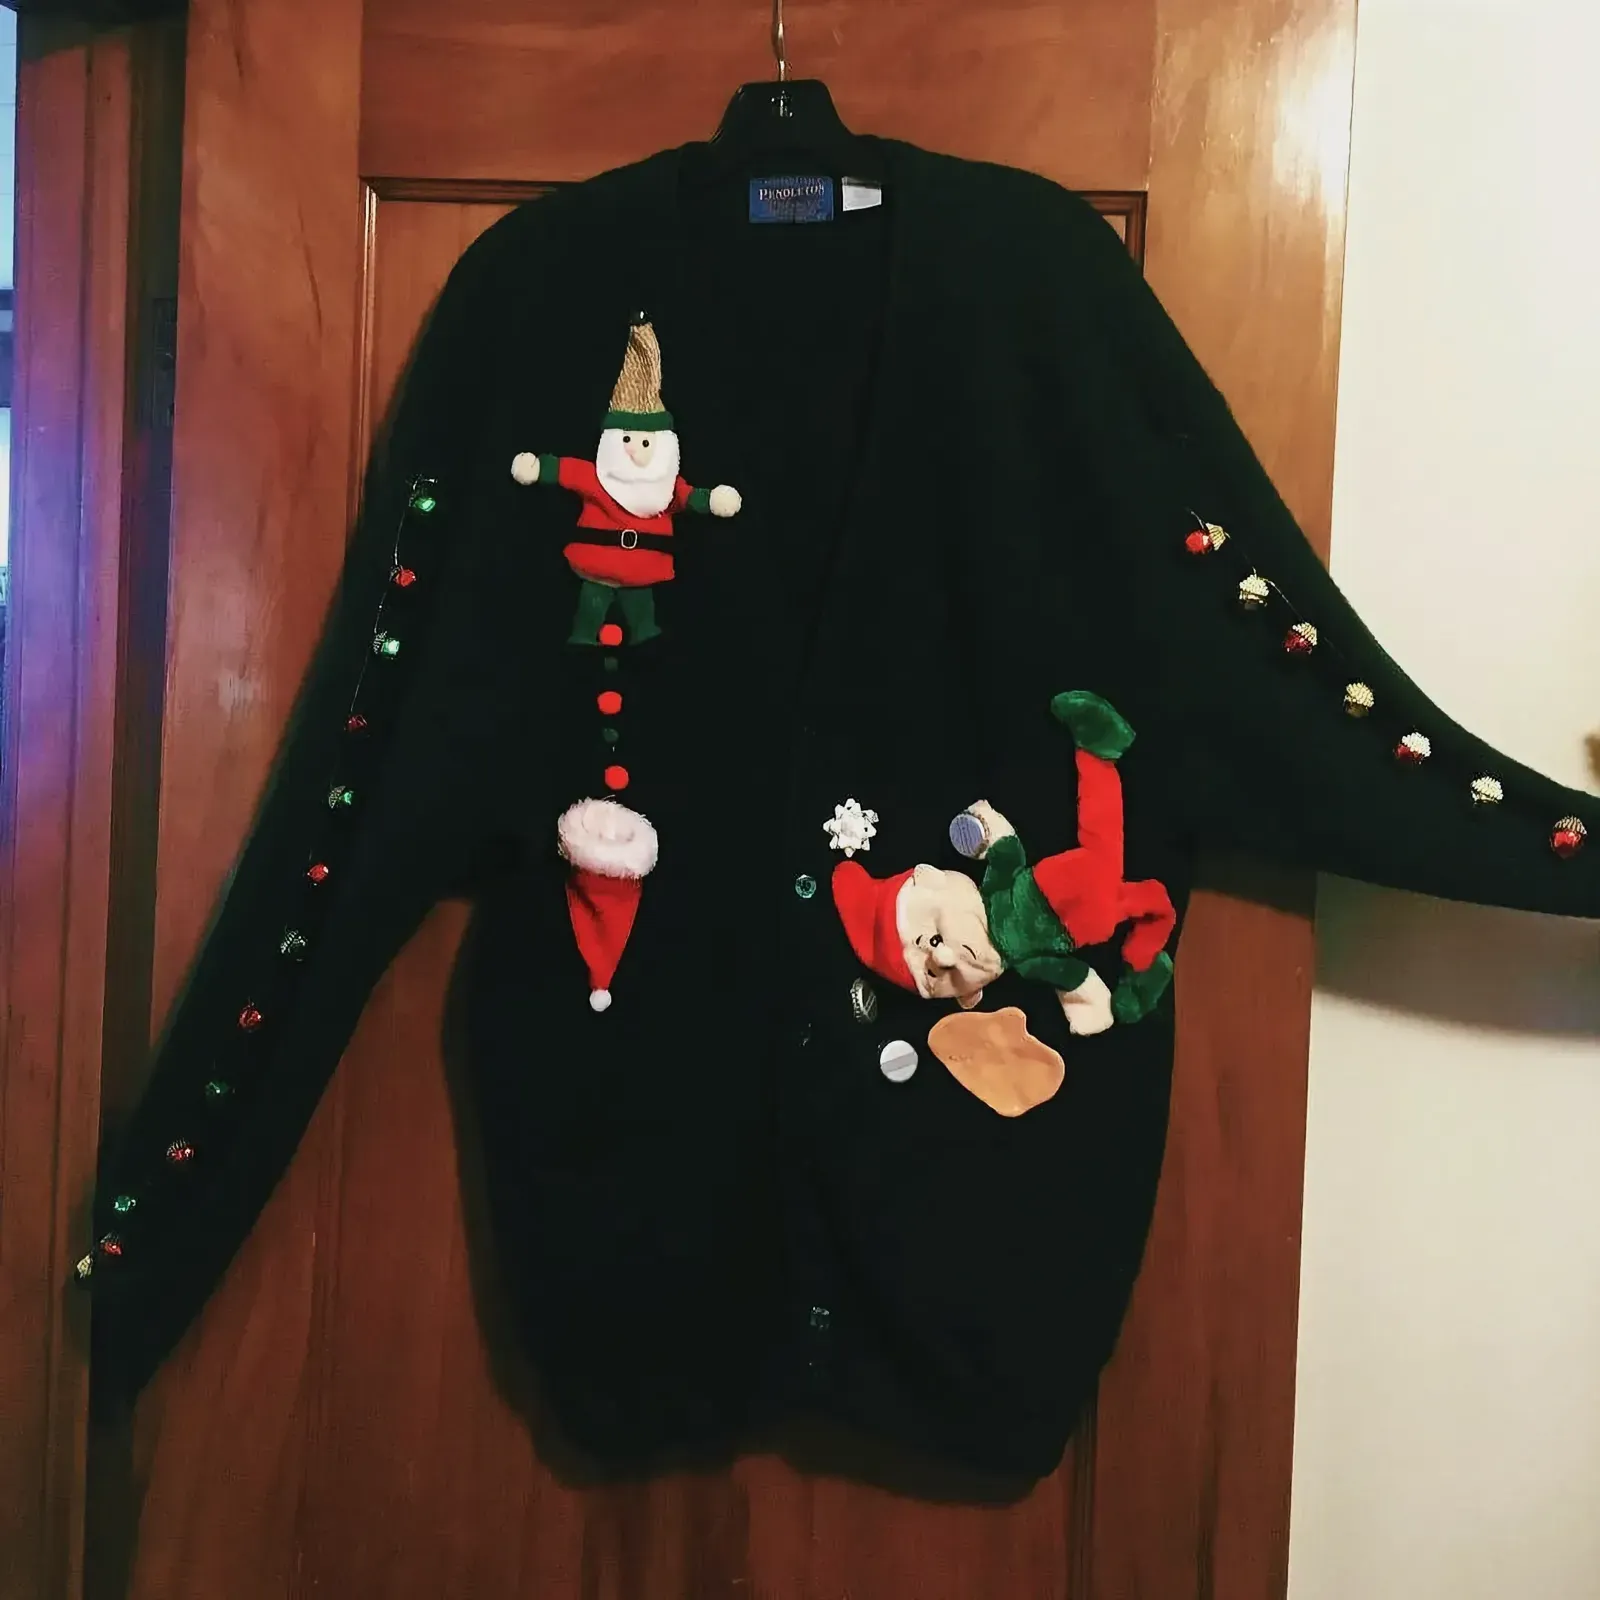 Festive sweater with Christmas theme